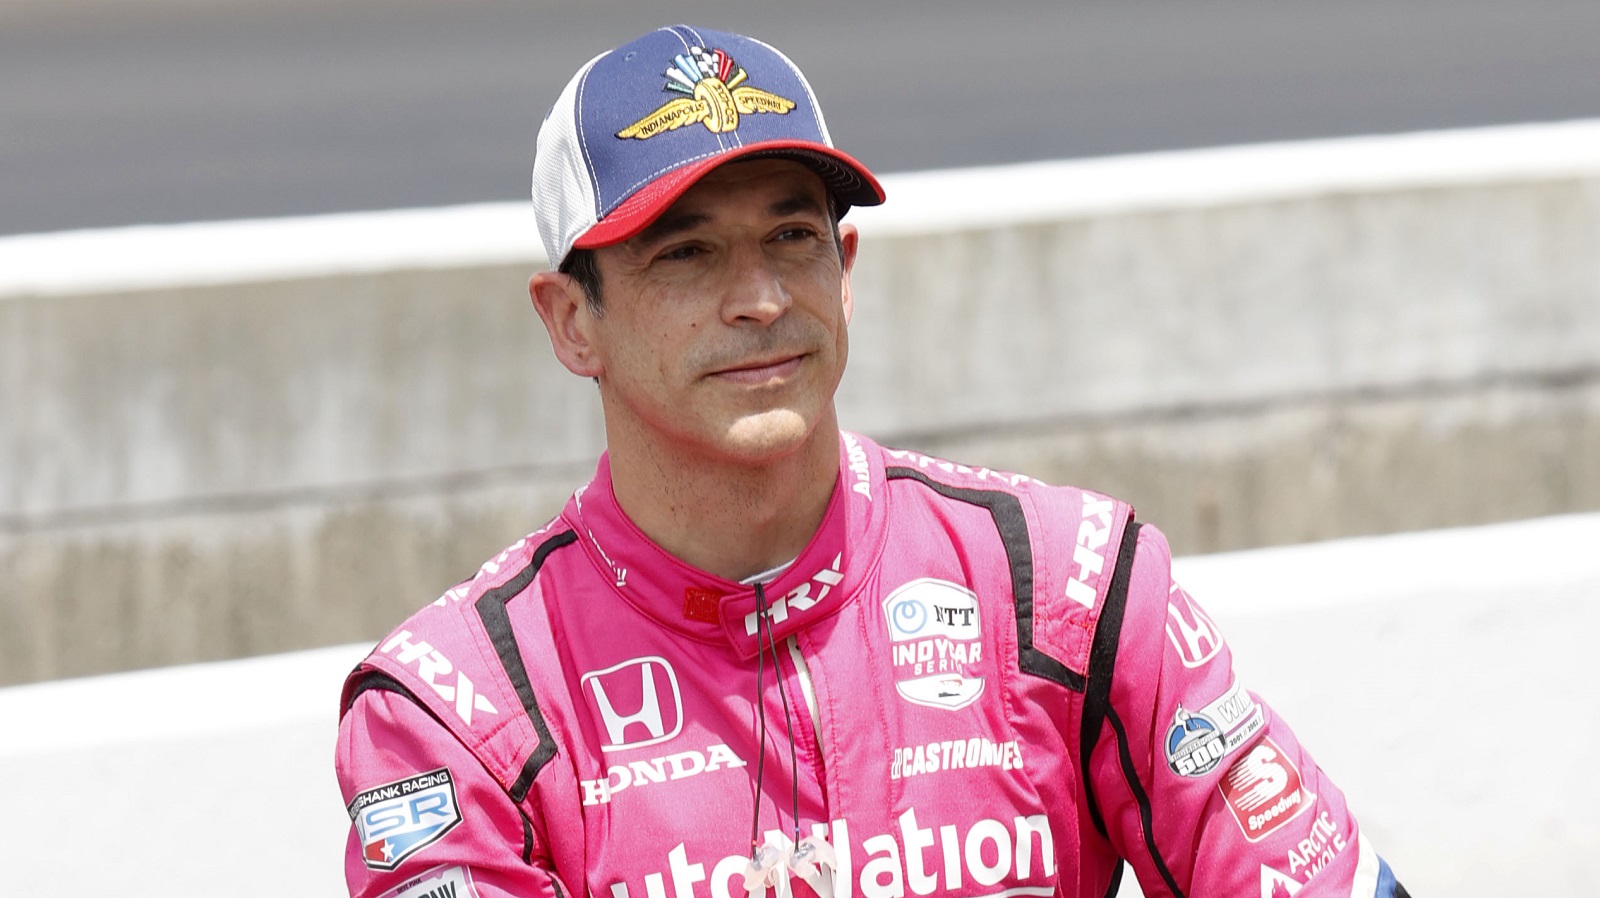 What Is Indianapolis 500 Legend Helio Castroneves Net Worth?